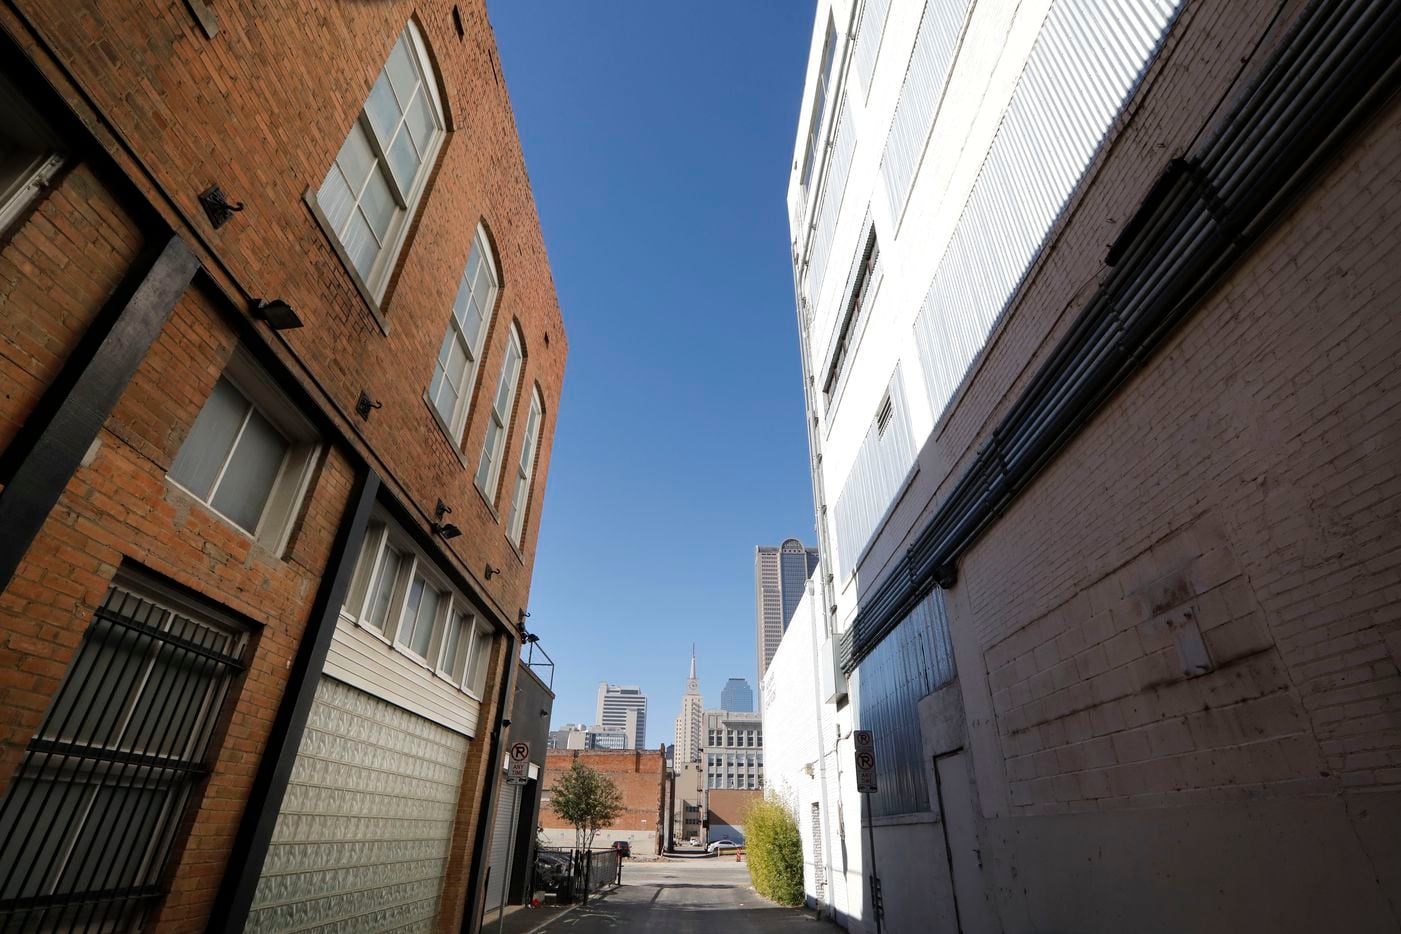 The Munger Cadillac building, left, and the building on the right, is part of the...